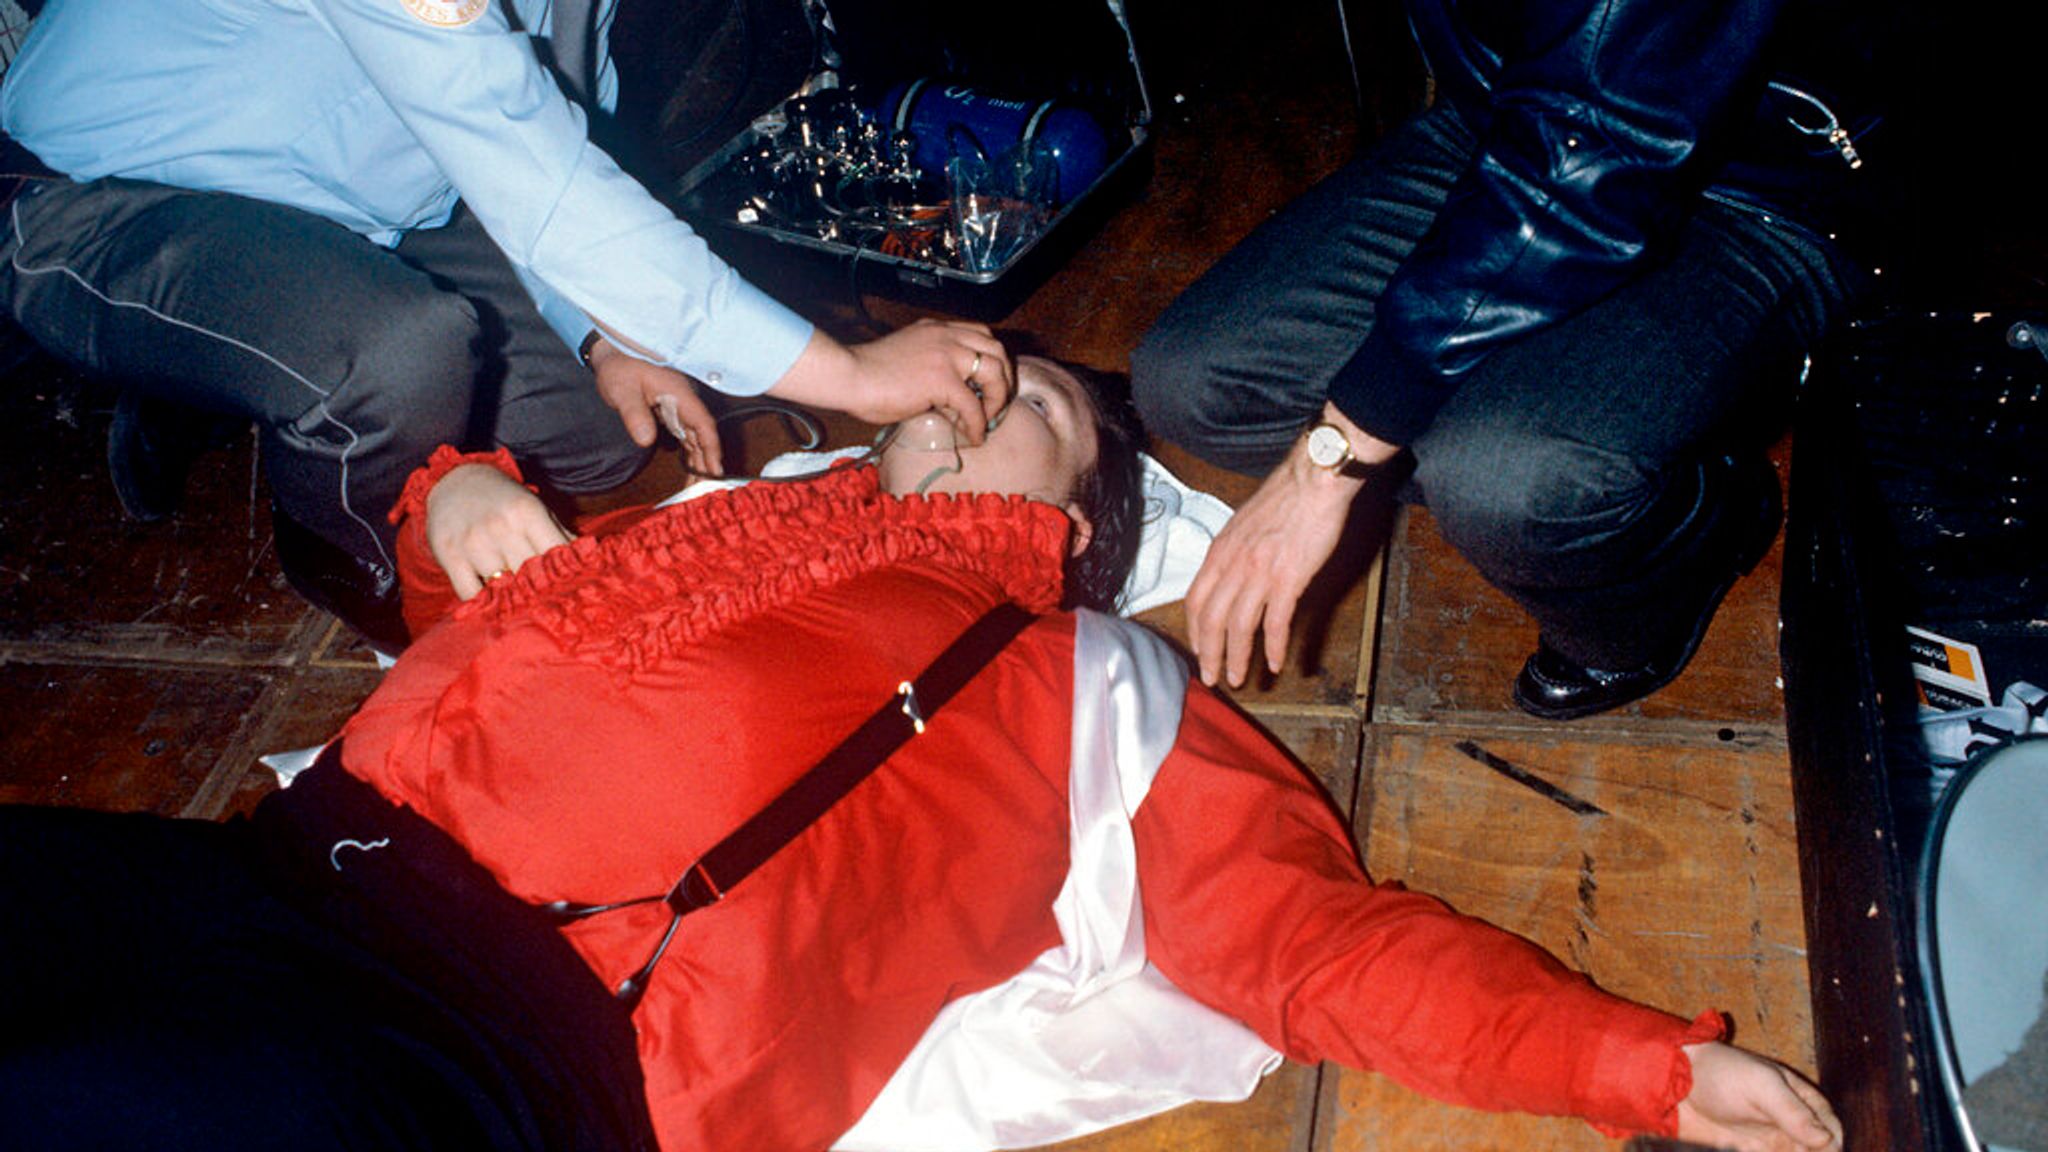 Meat Loaf in December 1981 receiving medical aid after an accident. Pic: dpa/AP